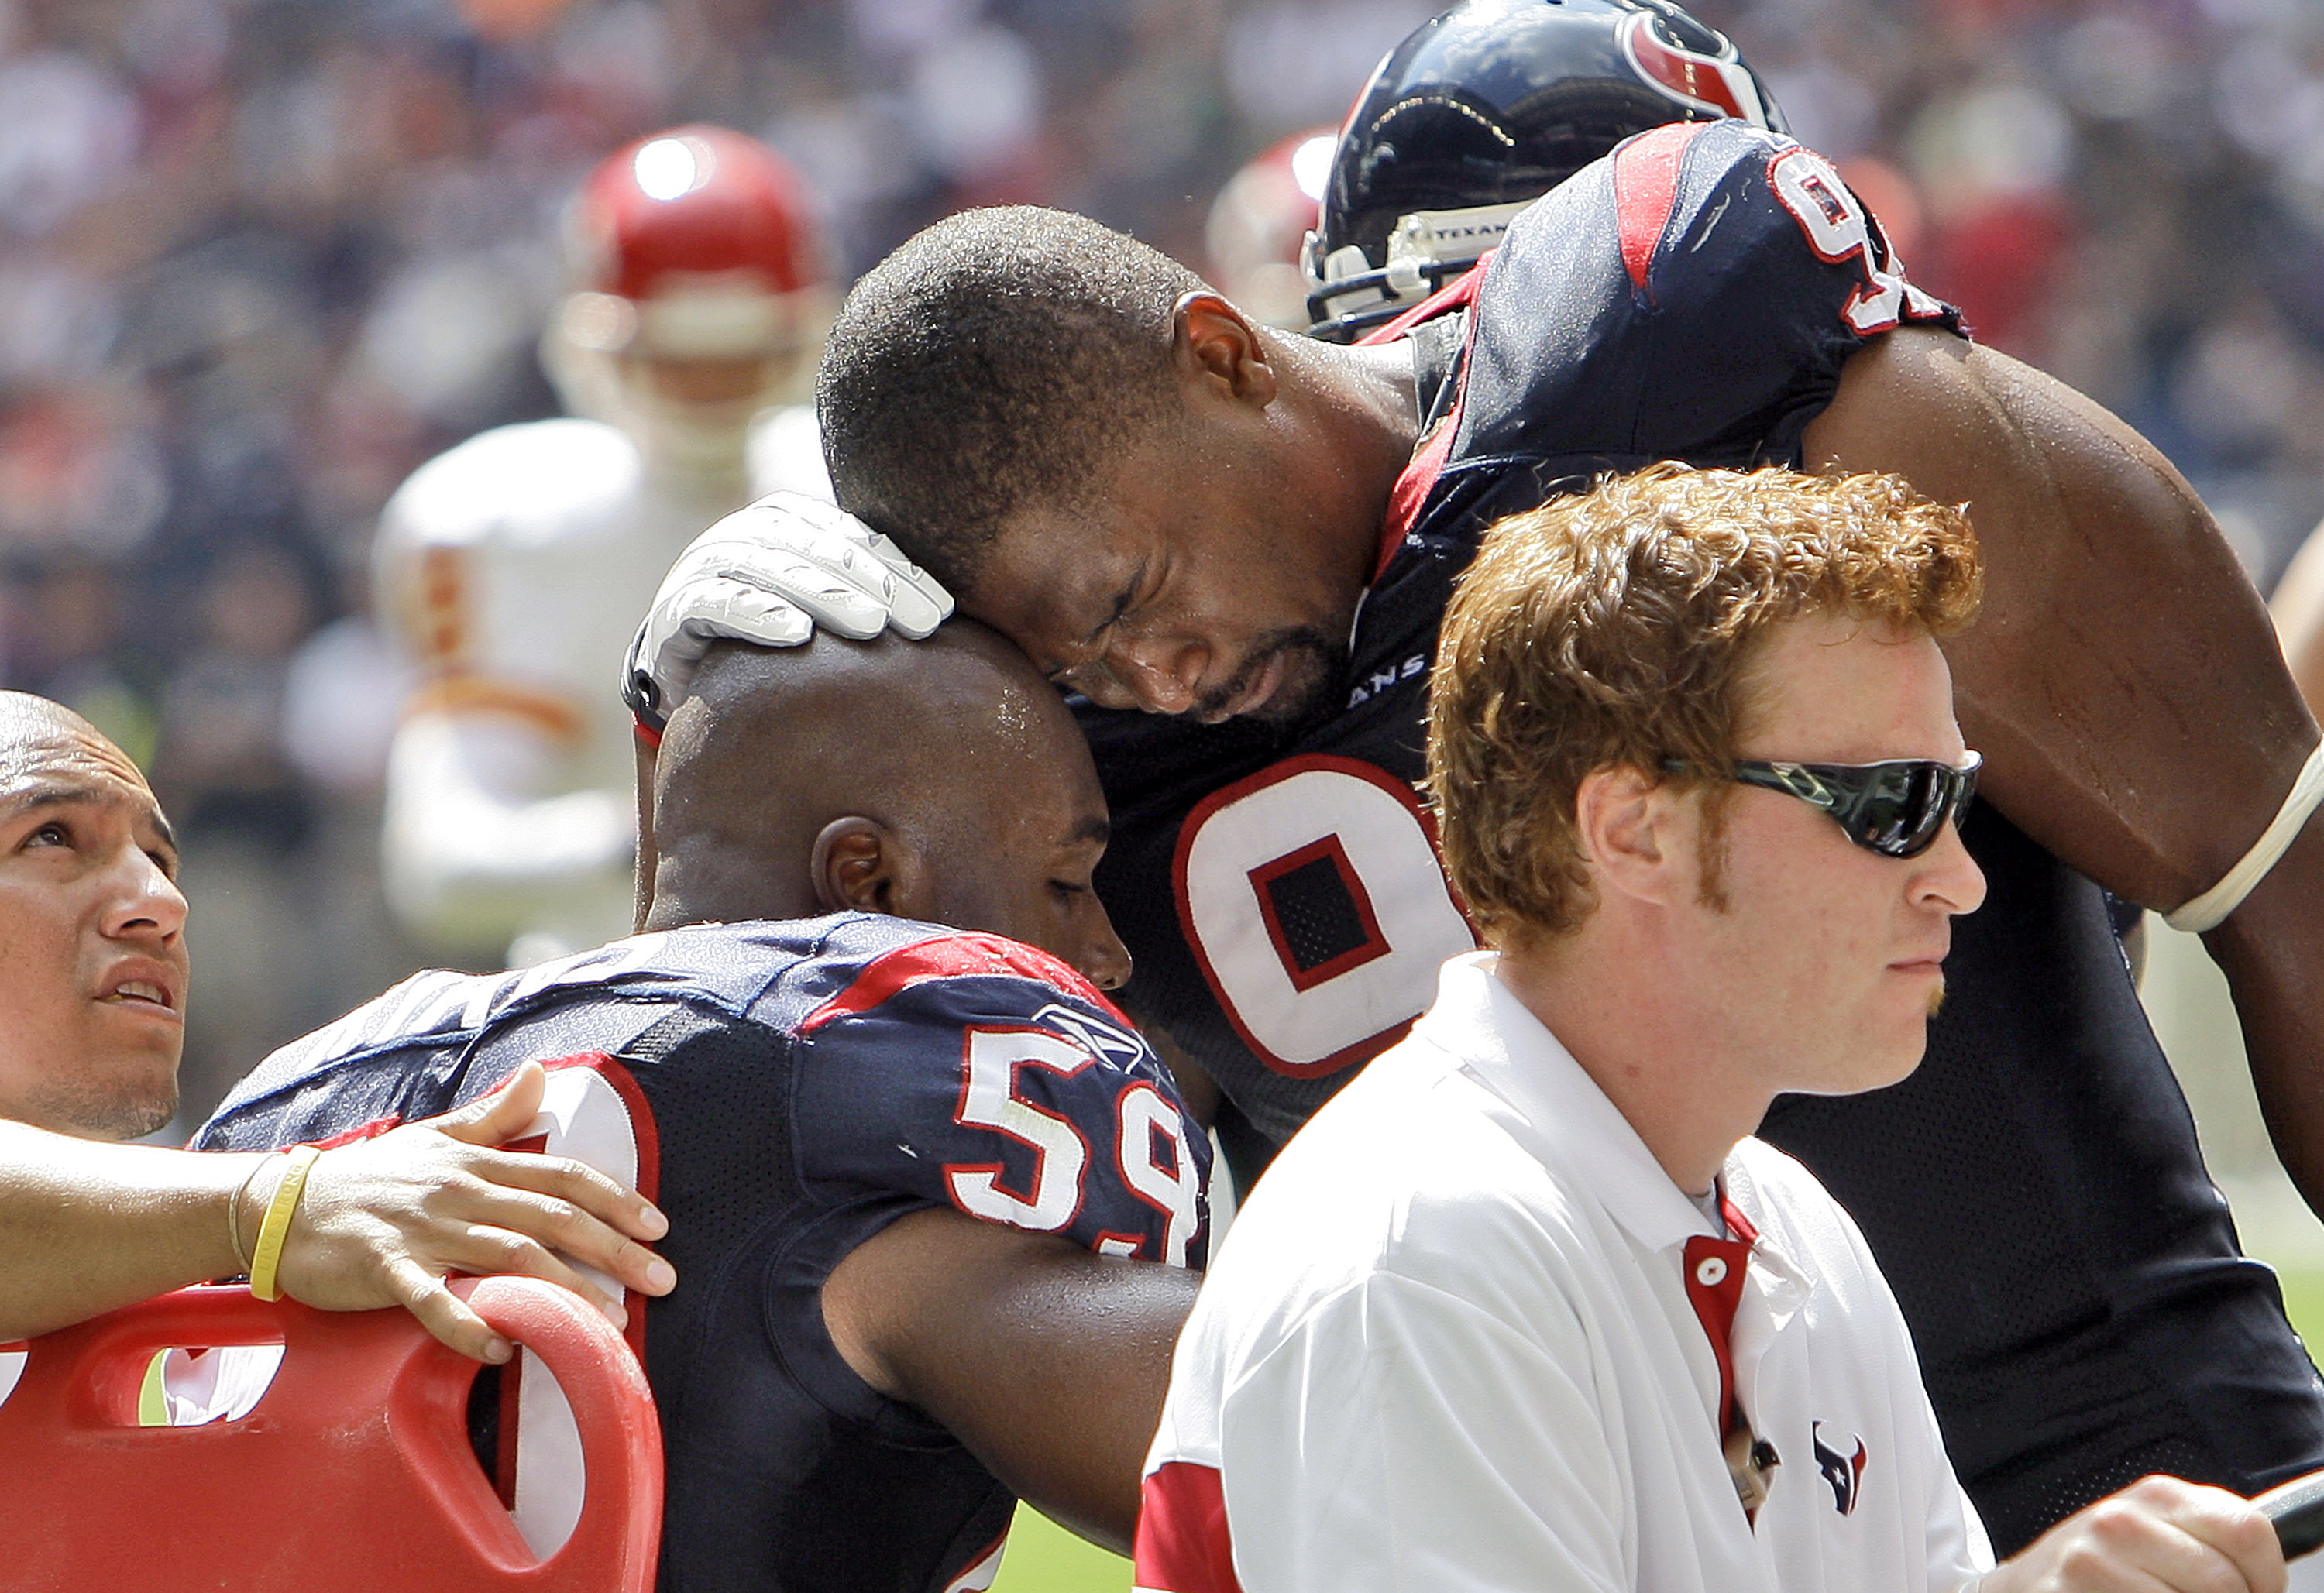 HOUSTON - OCTOBER 17:  DeMeco Ryans #59 of the Houston Texans is comforted by  Amobi Akoye #91 as he is carted off the field at Reliant Stadium on October 17, 2010 in Houston, Texas.  (Photo by Bob Levey/Getty Images)